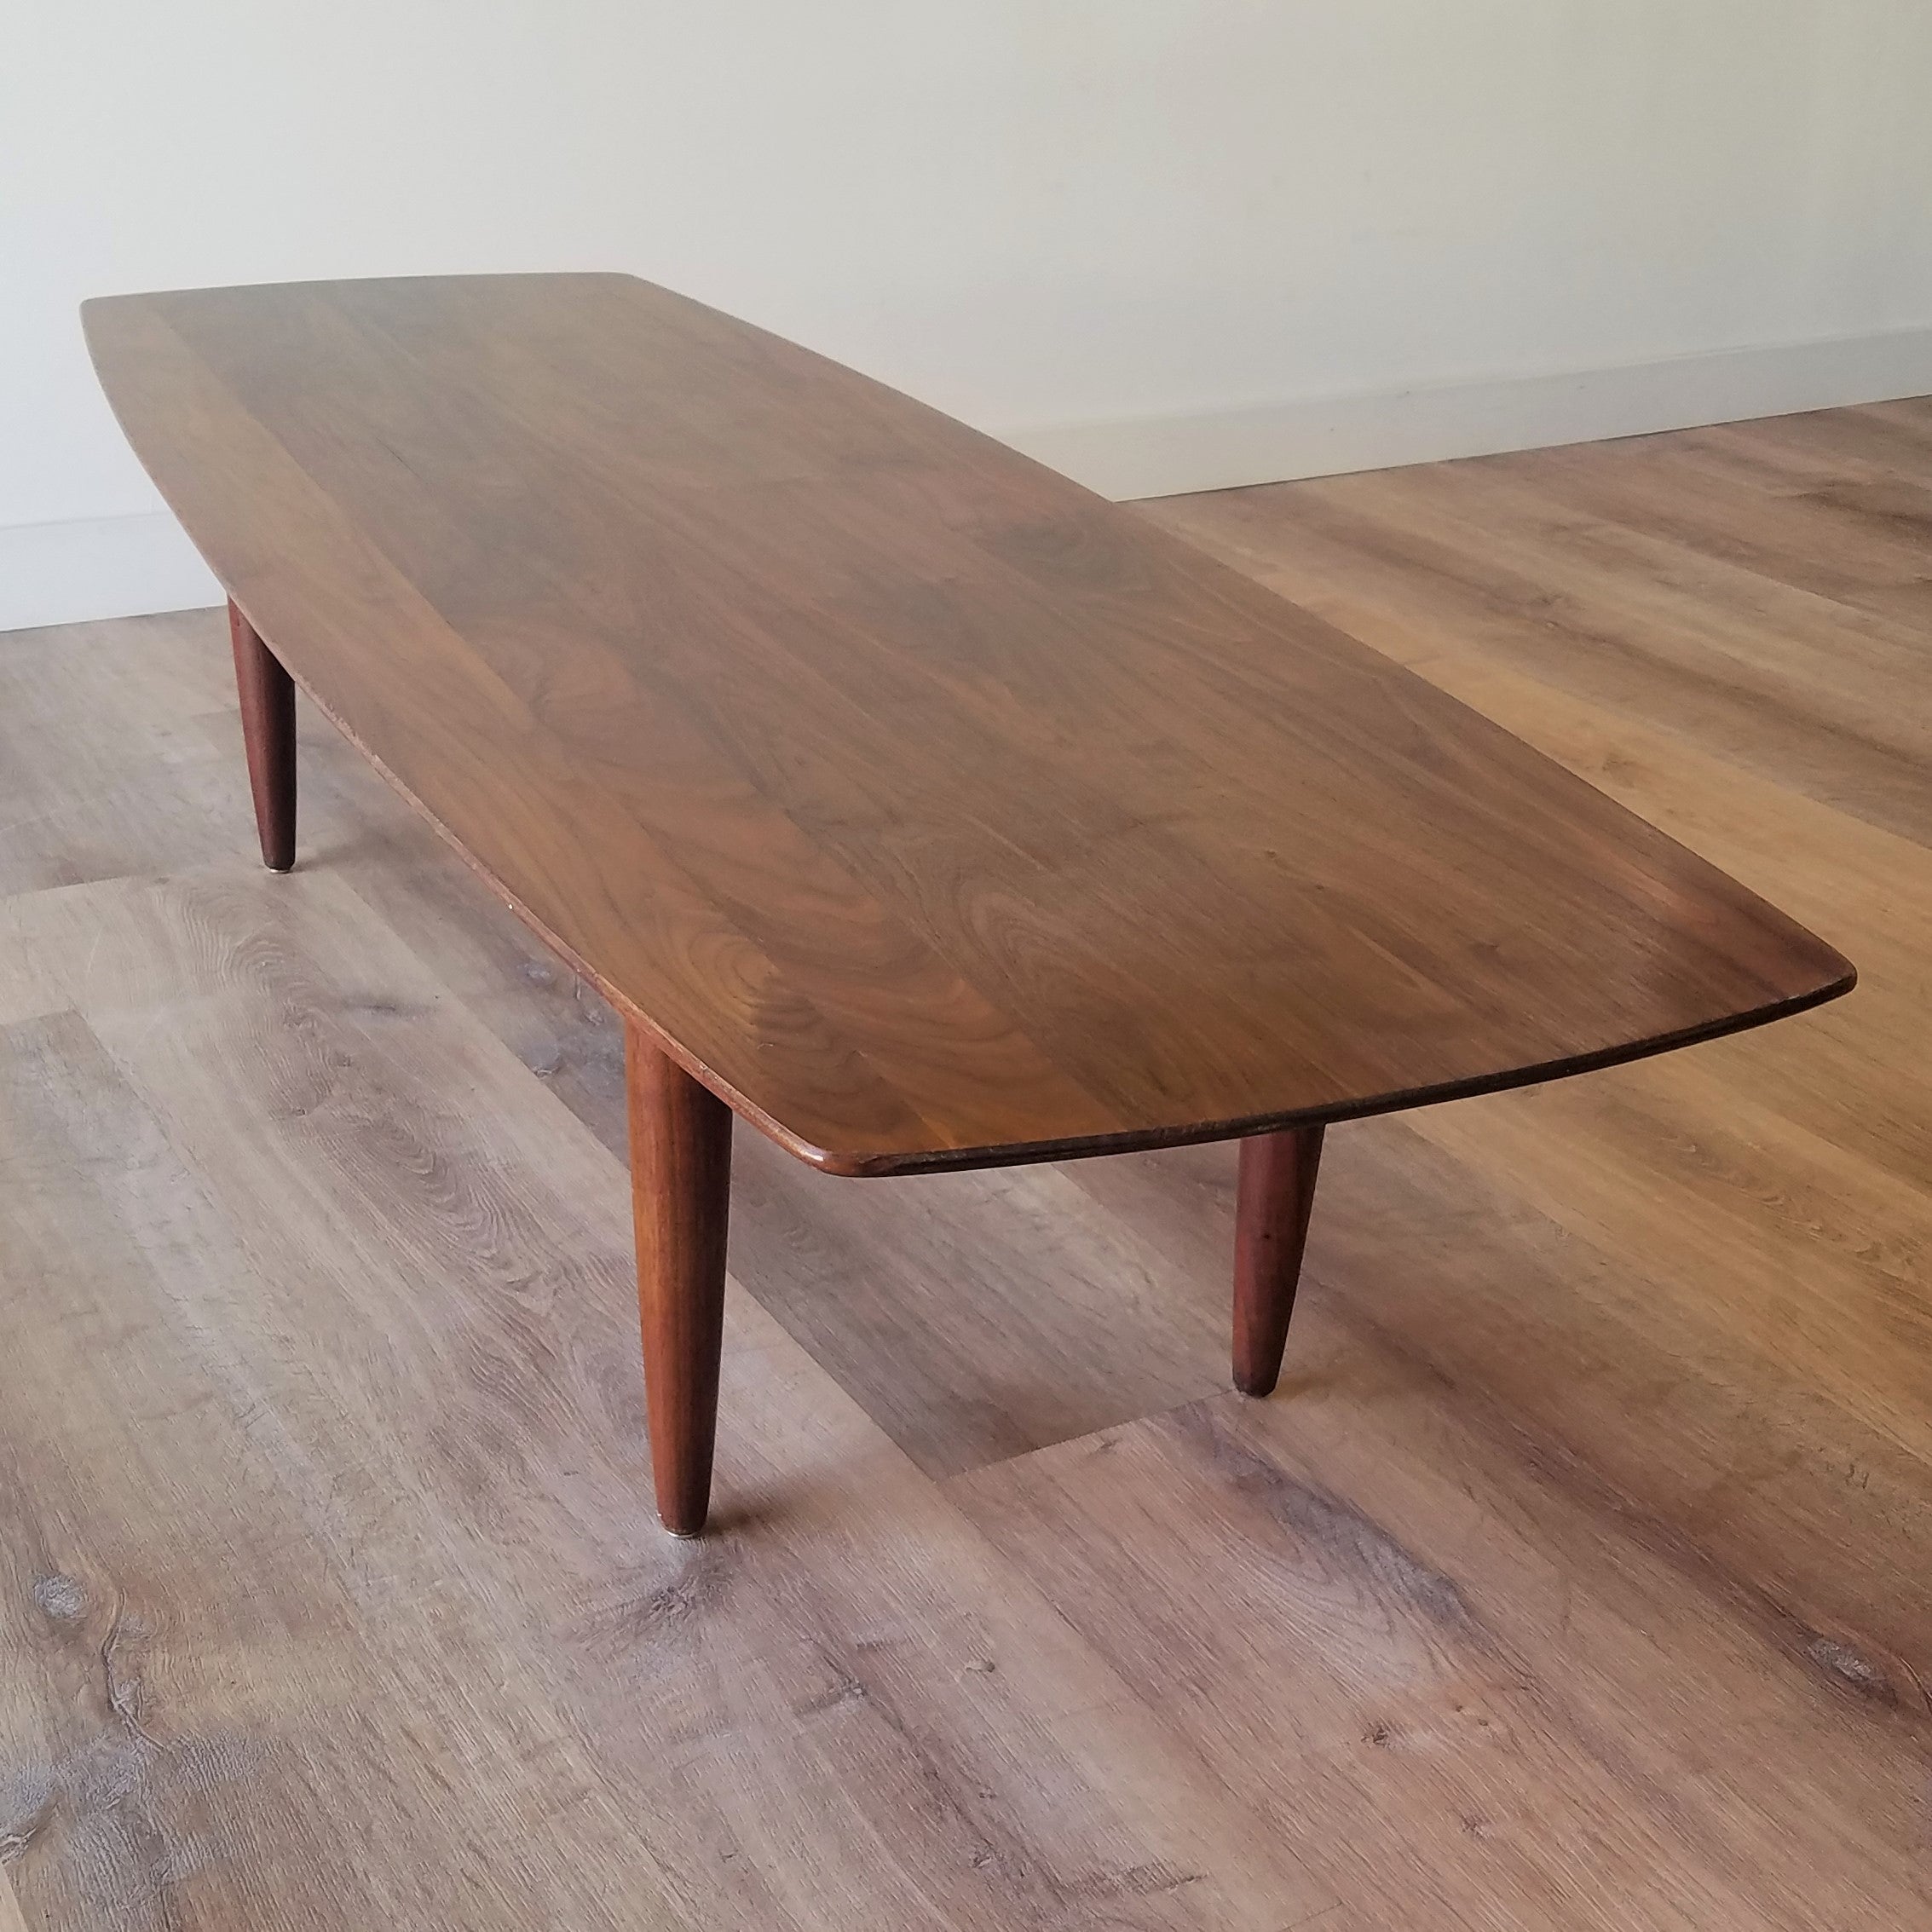 Front Angle view of Vintage American Mid-Century Modern Prelude Walnut Surfboard Coffee Table in Seattle, Washington.